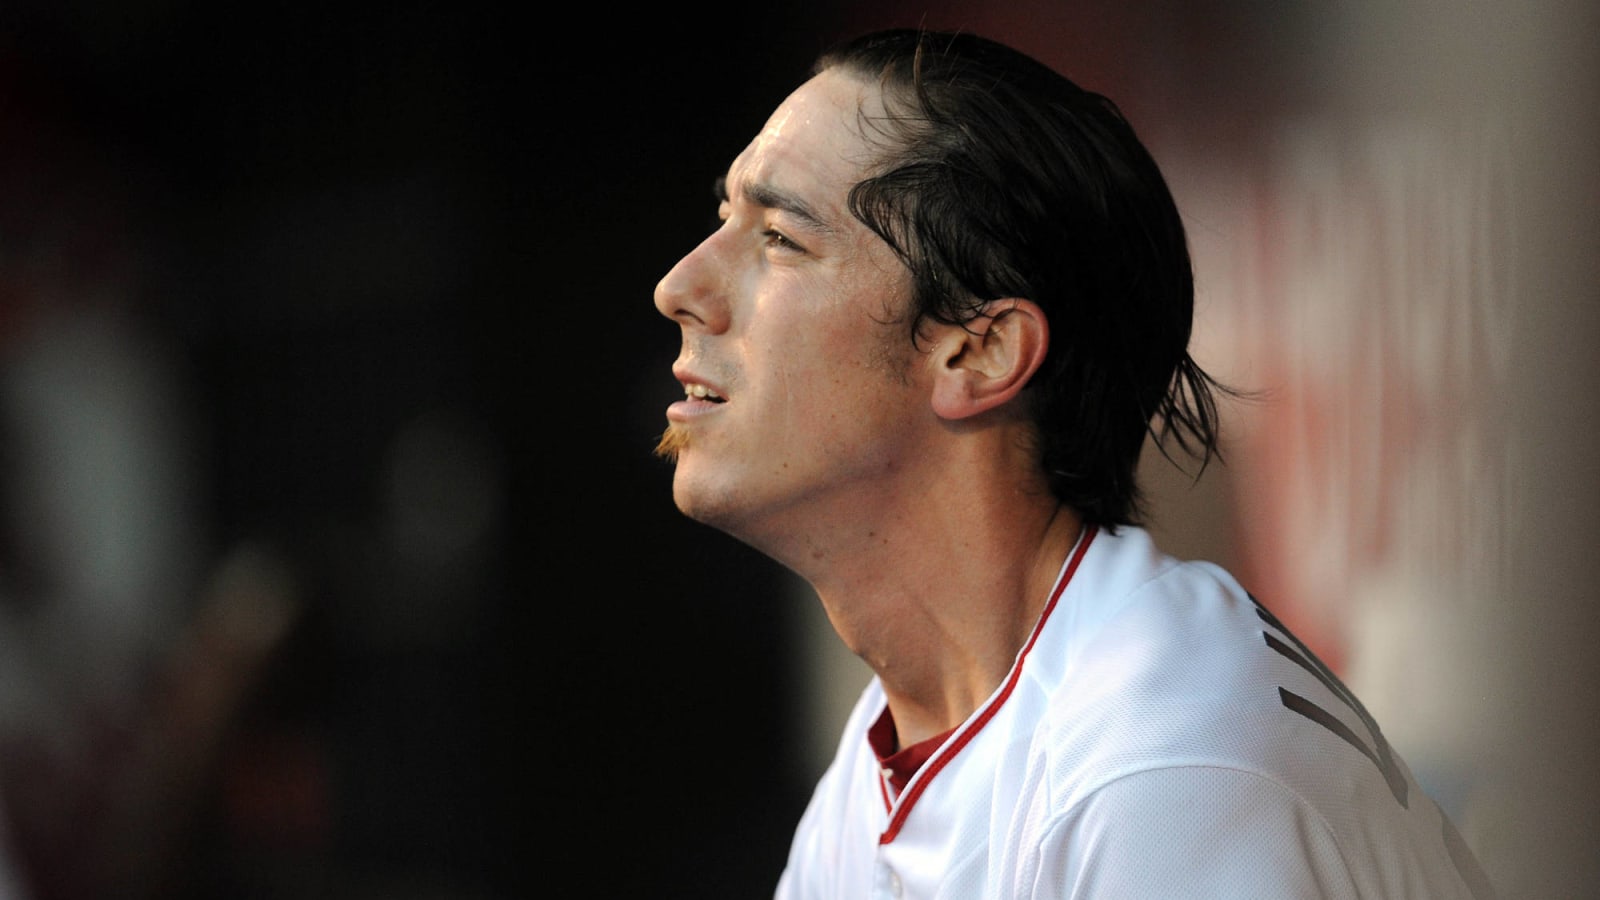 Tim Lincecum will wear No. 44 to honor his late brother